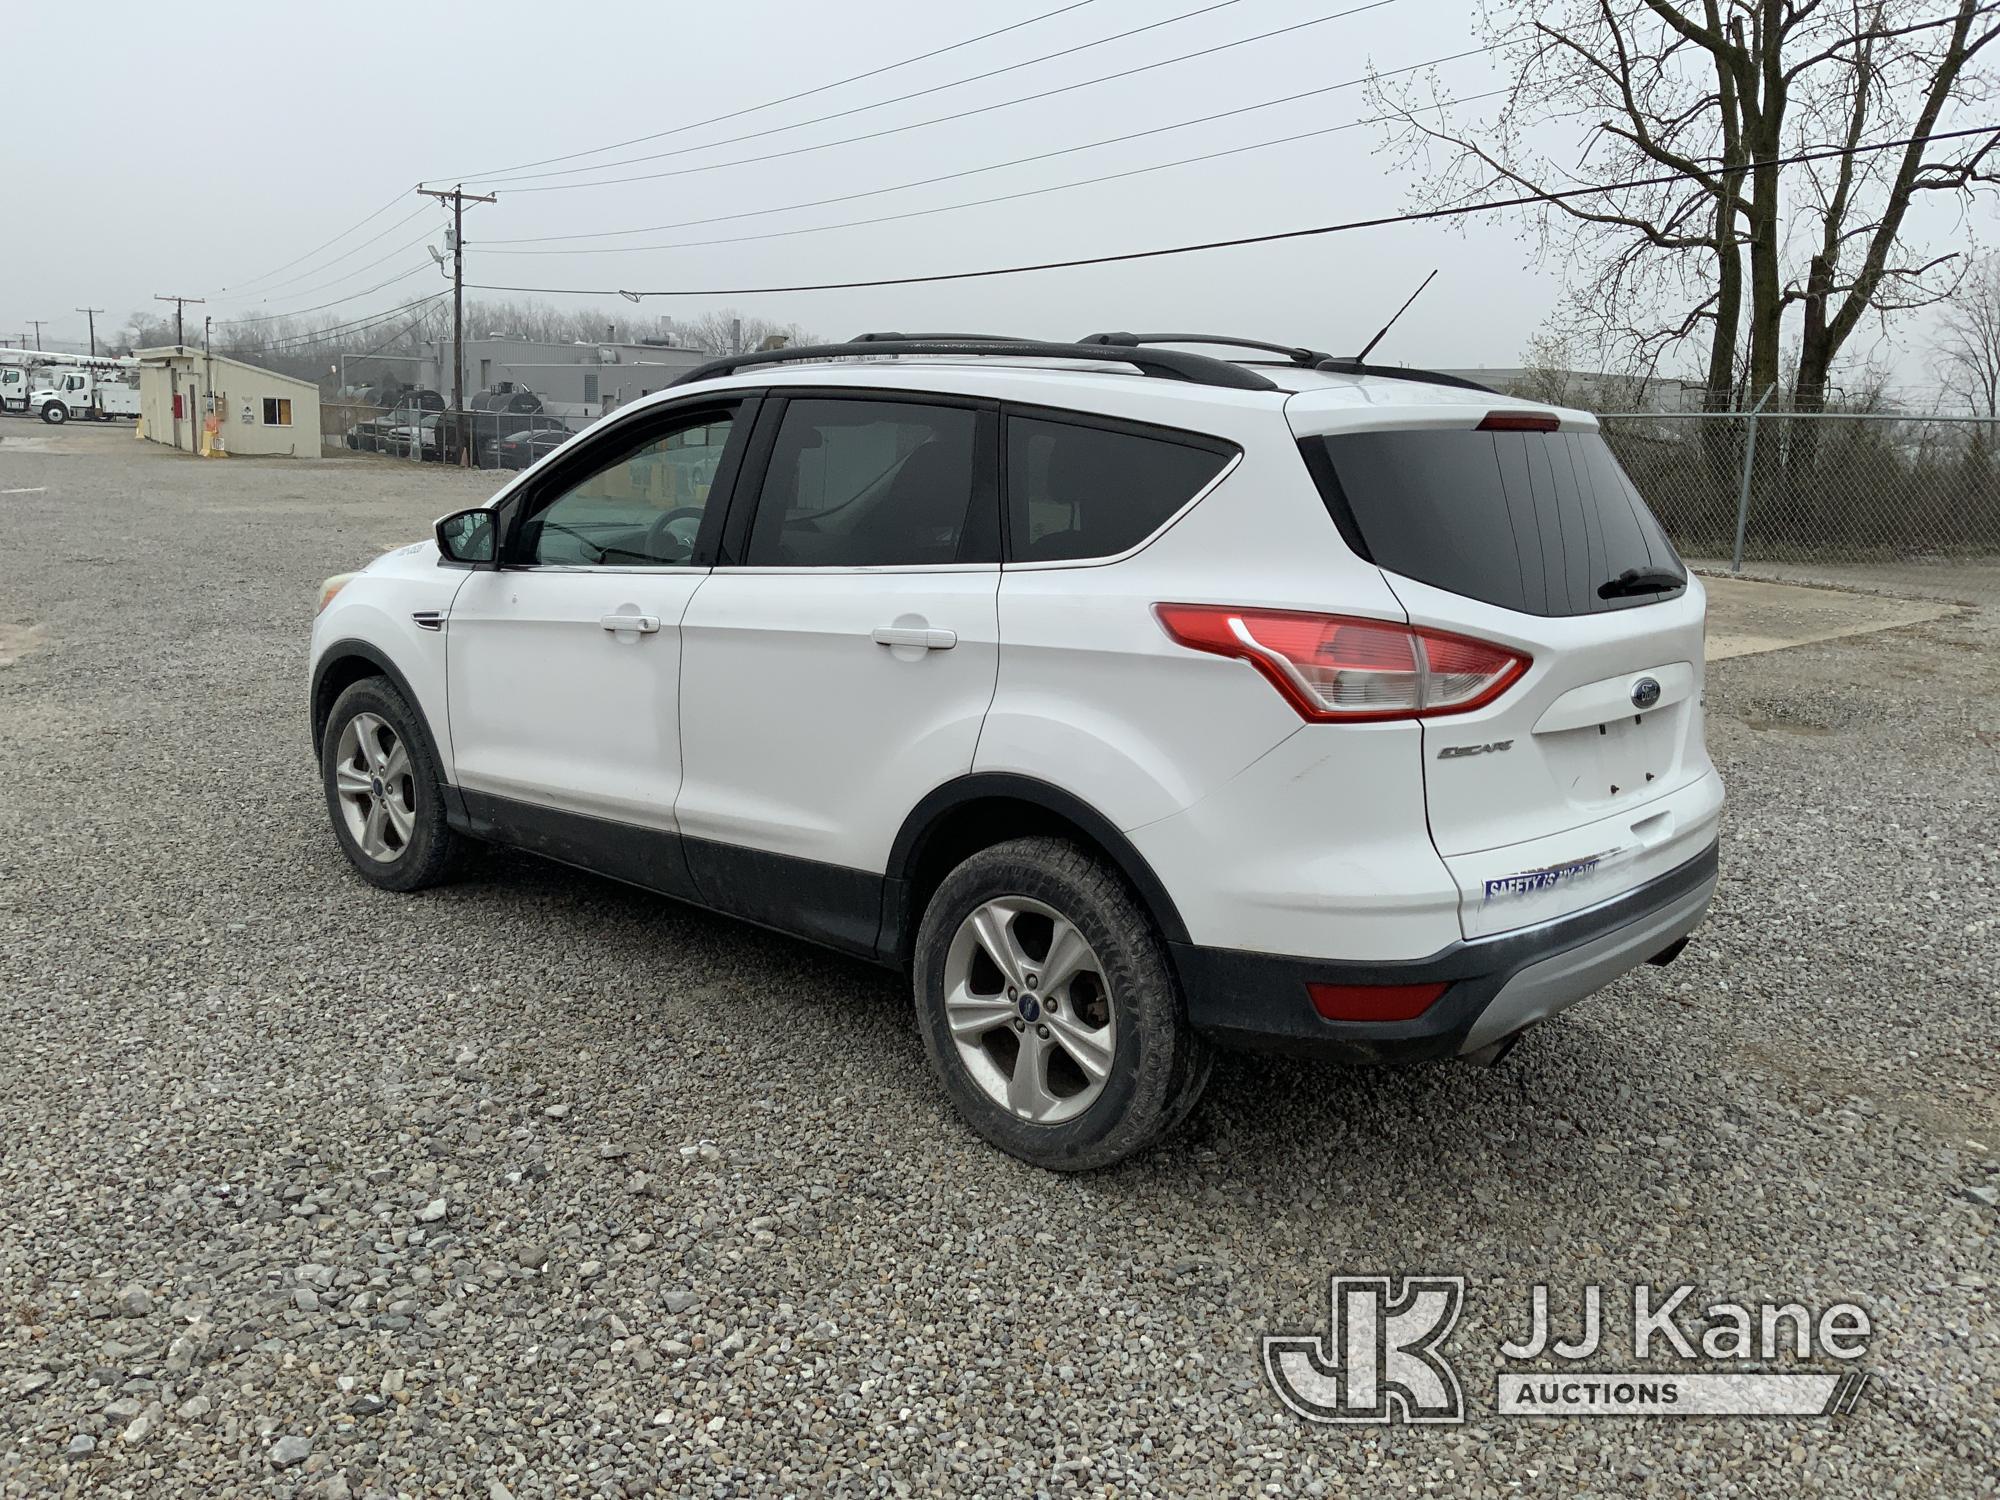 (Fort Wayne, IN) 2013 Ford Escape 4x4 4-Door Sport Utility Vehicle Runs & Moves) (Check Engine Light